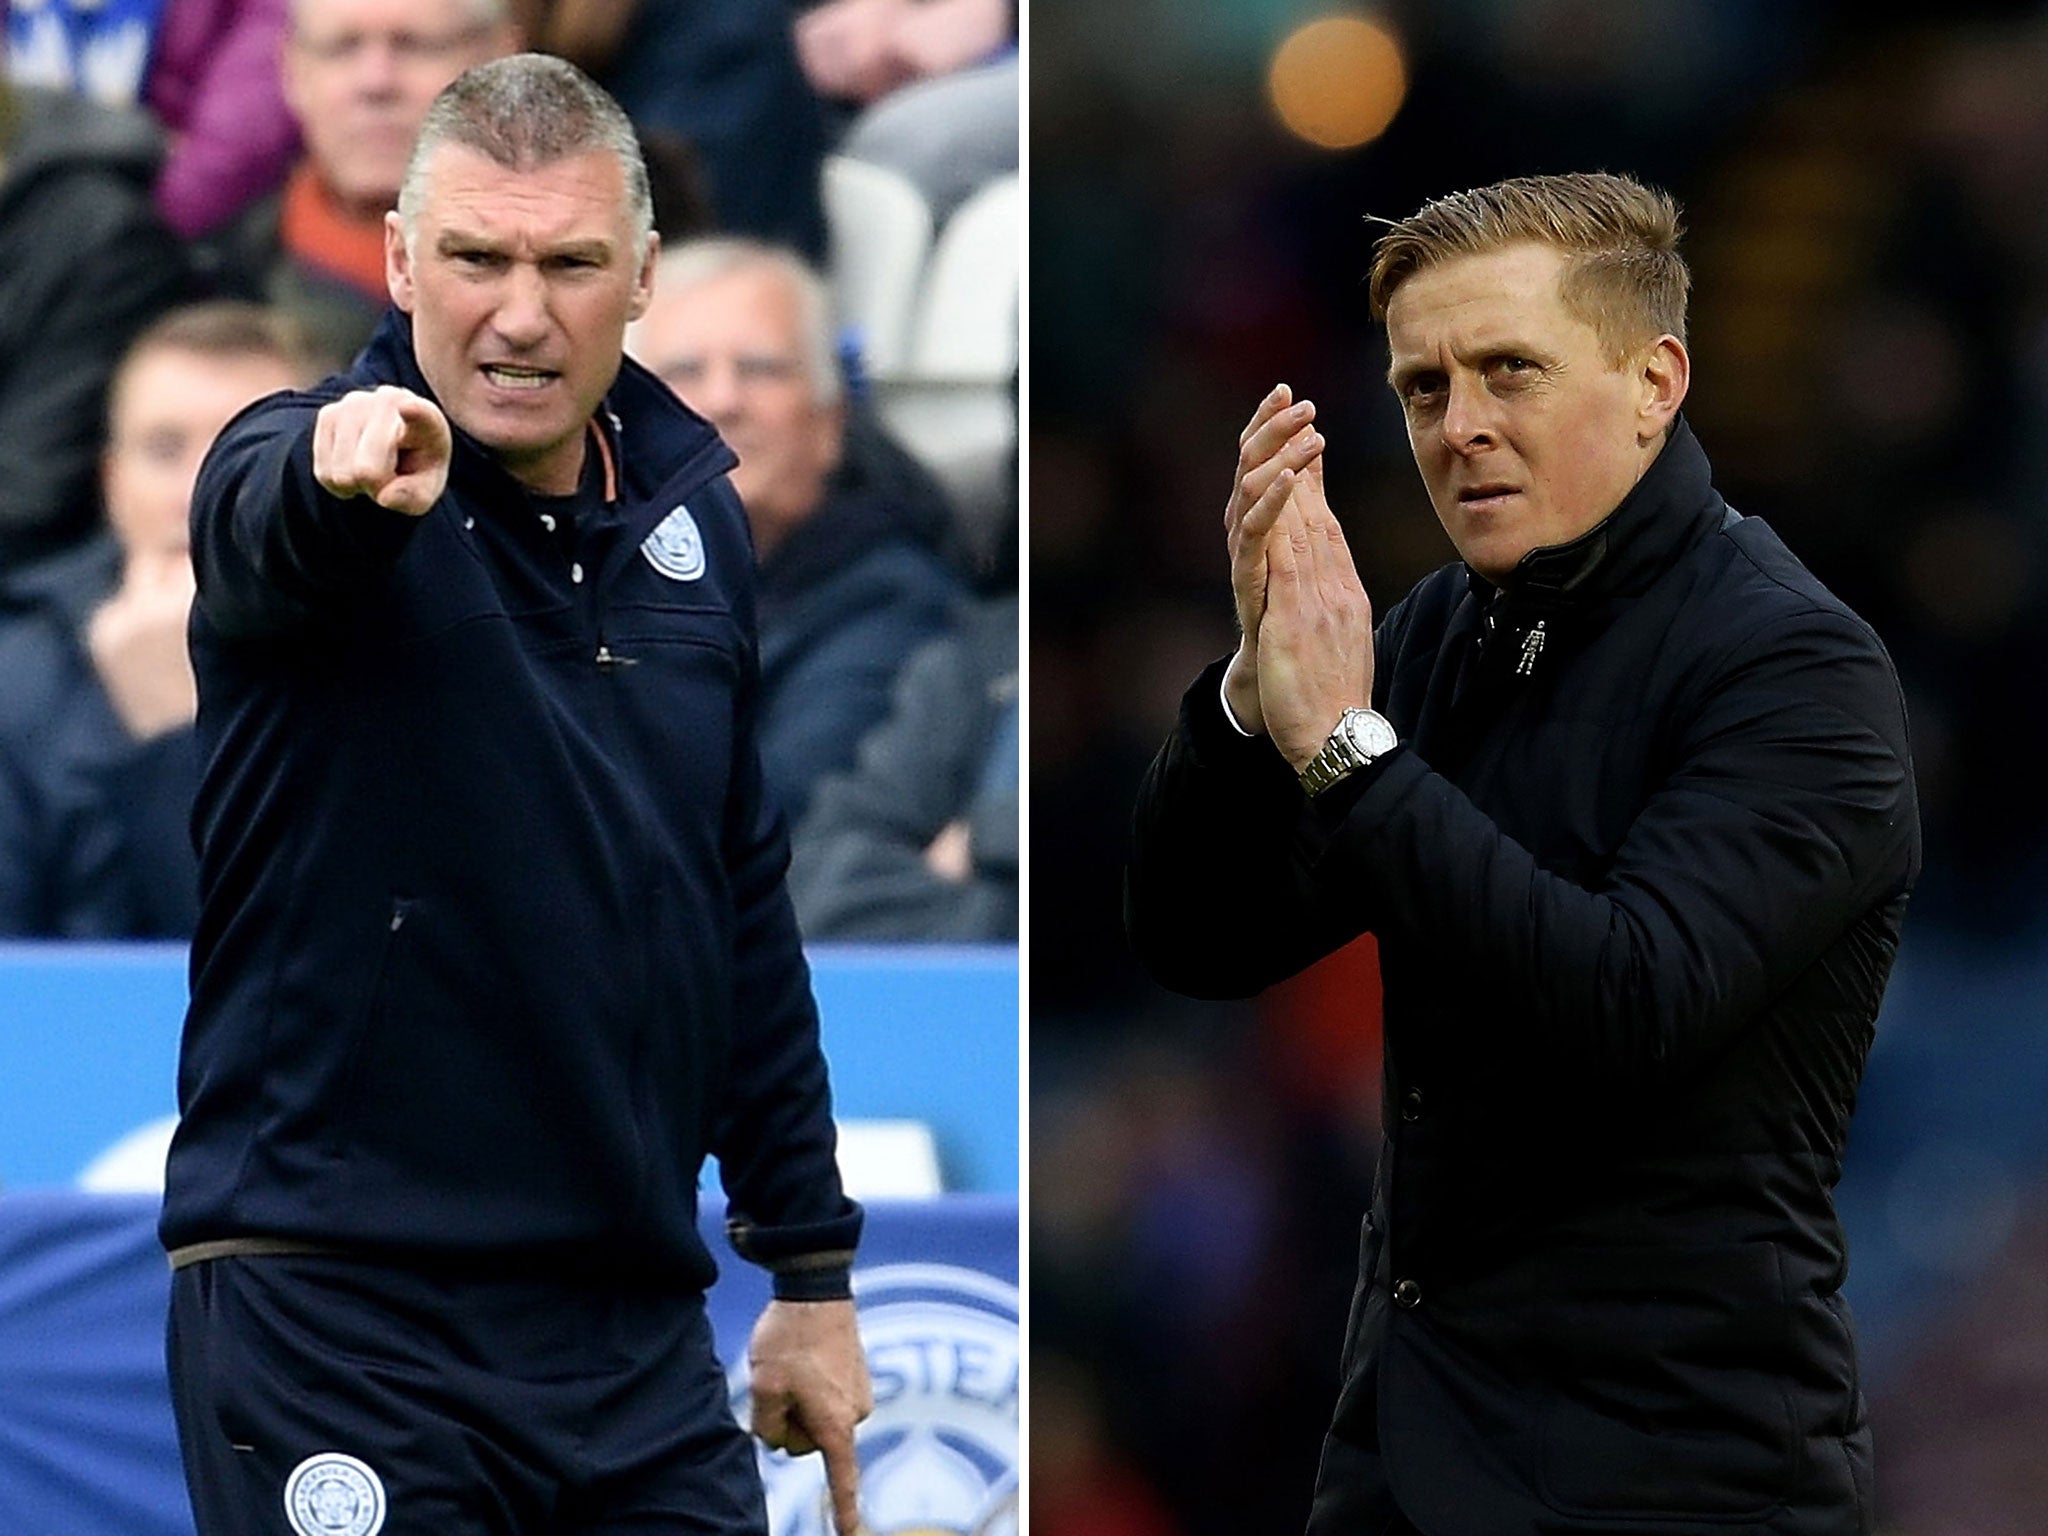 Nigel Pearson and Garry Monk